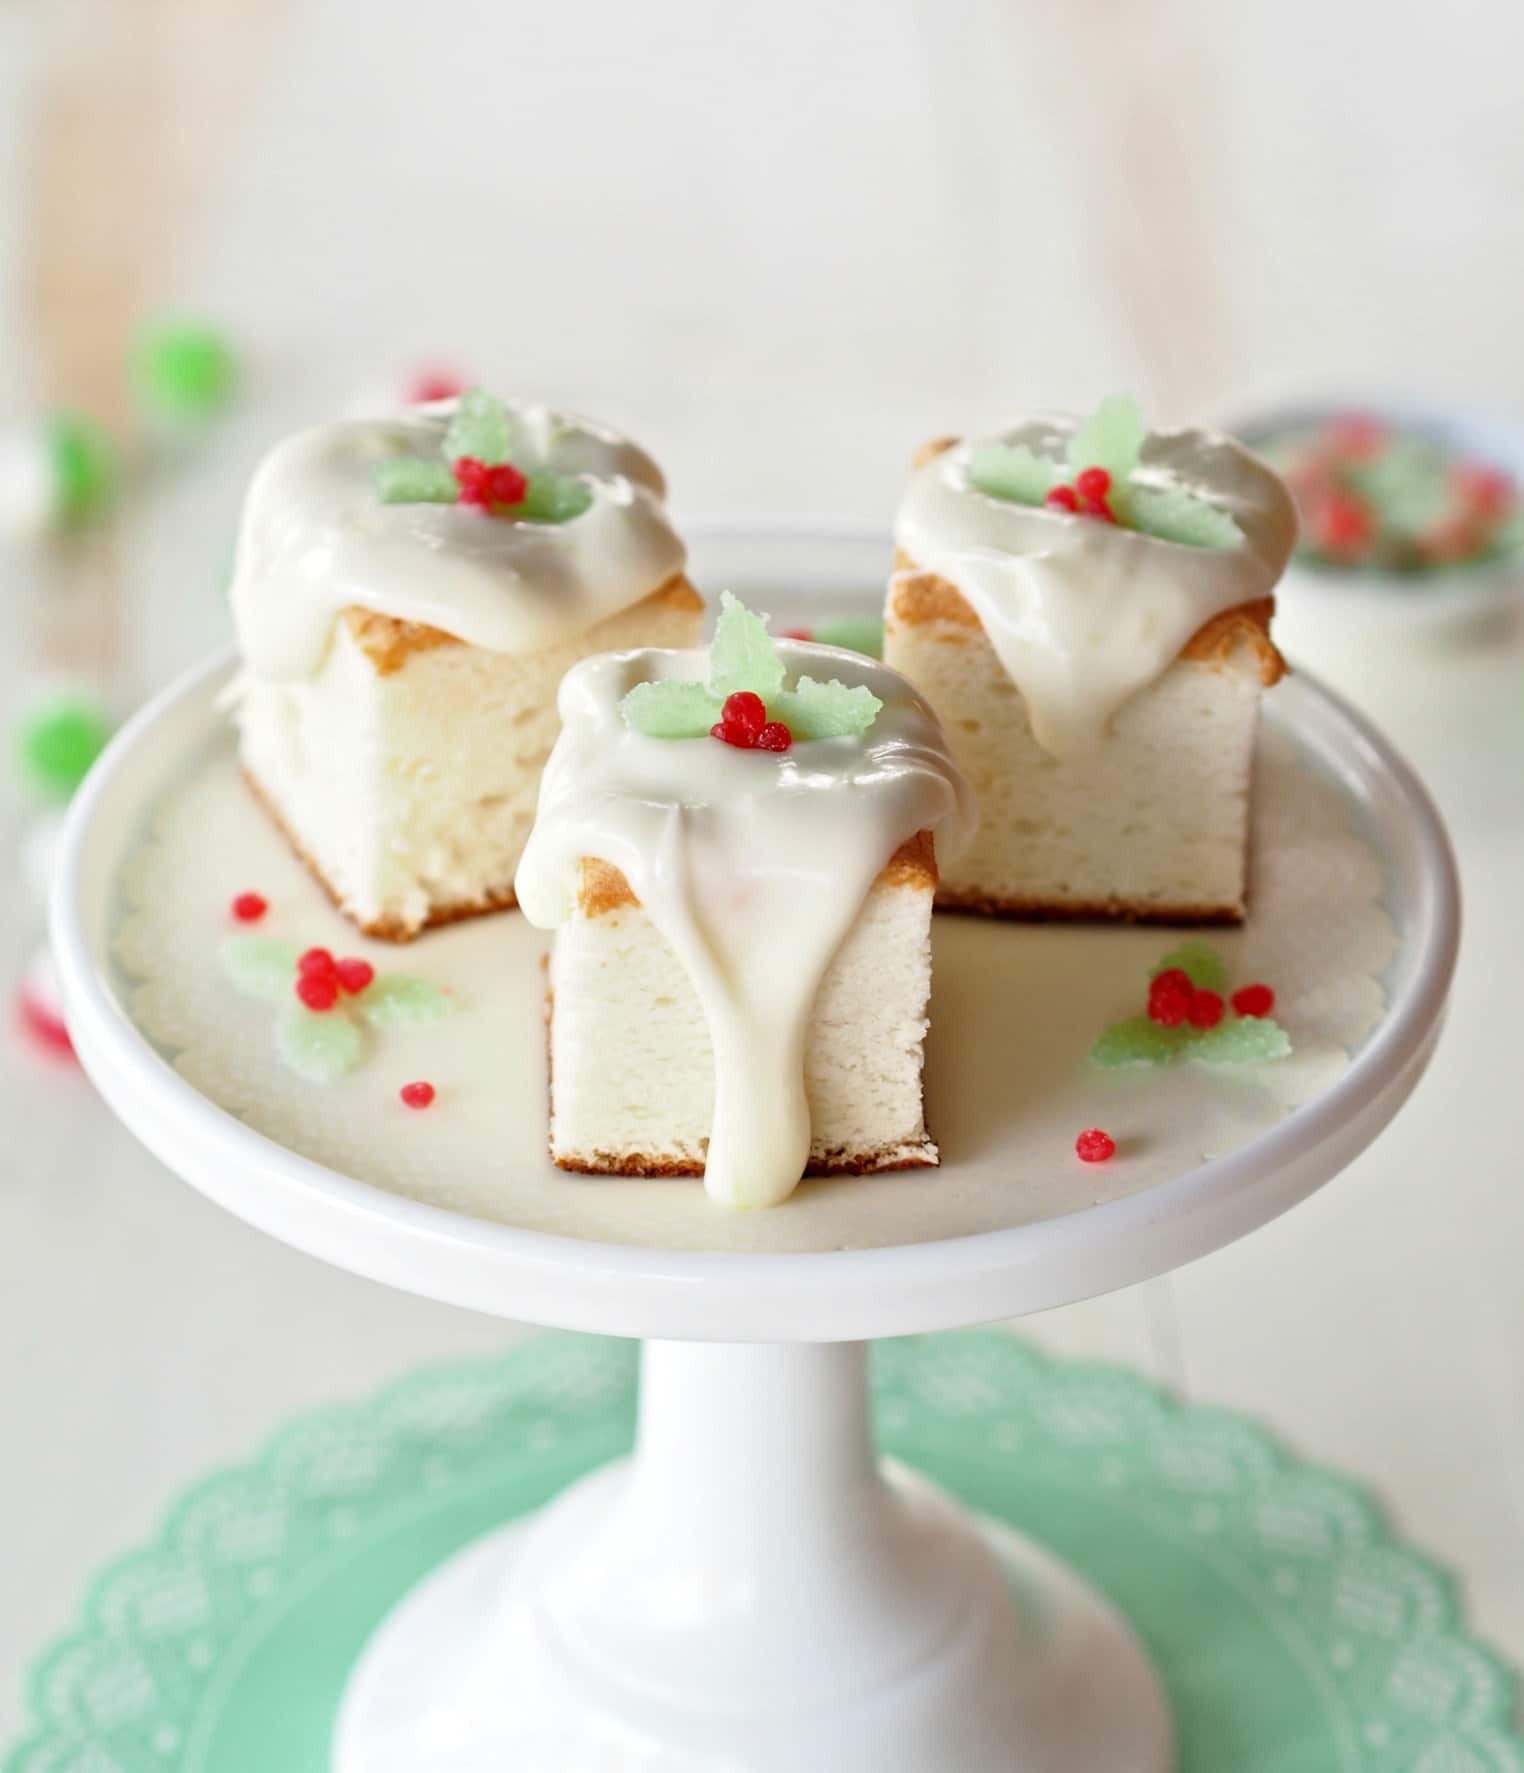 Angel Food Cake (Sheet Cake) - a fun way to serve a traditional dessert. Topped with a sensational lemon glaze that takes this cake to heavenly heights. Simply Sated